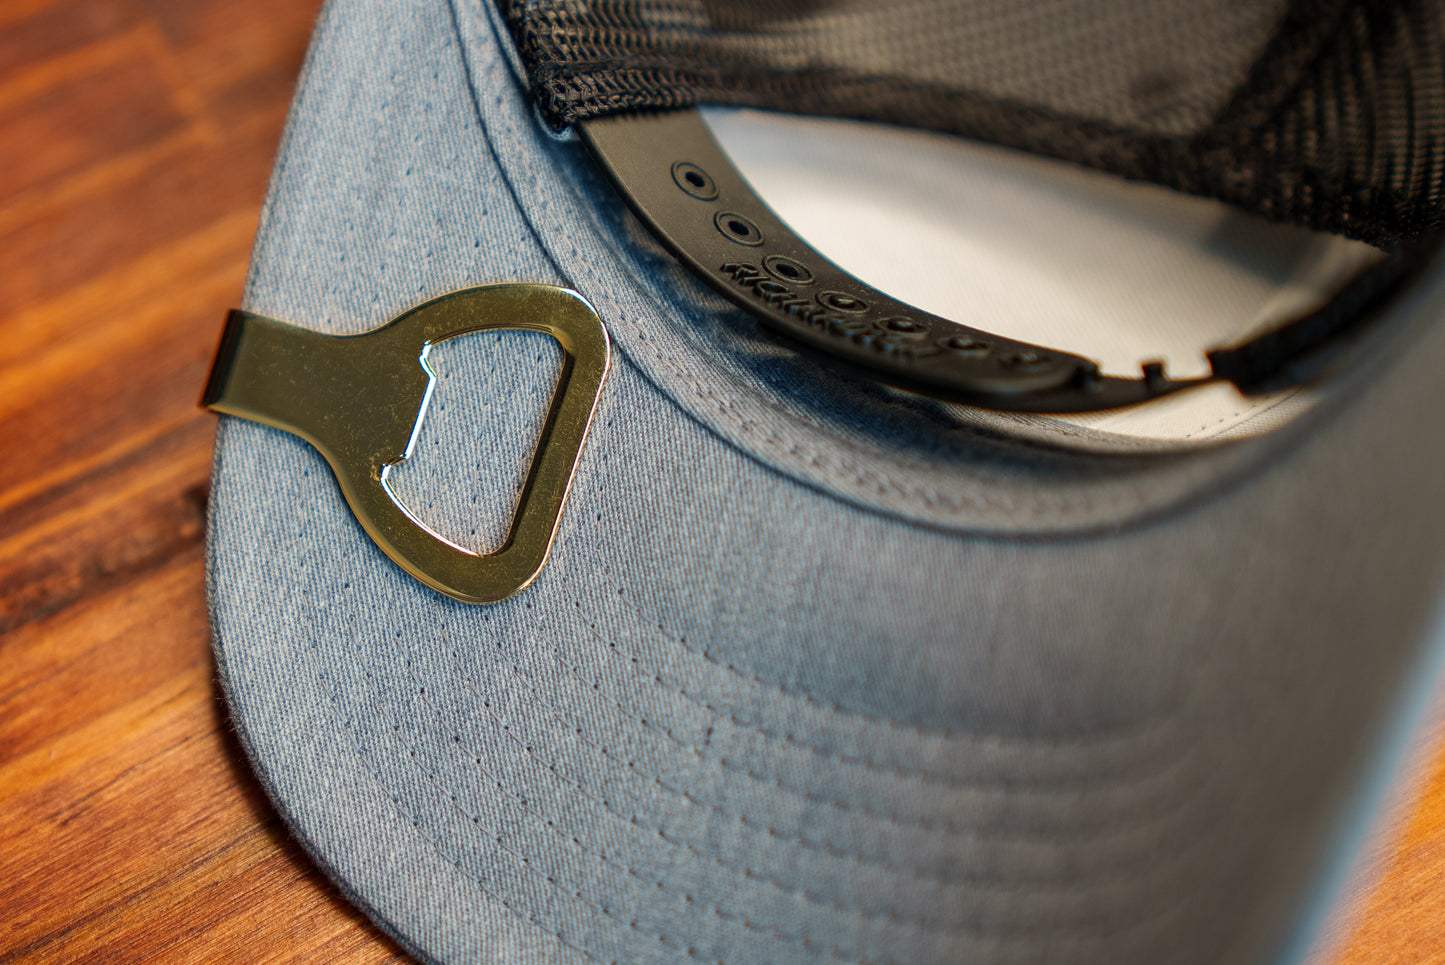 "The Thirsty Captain" Hat Clip Bottle Opener